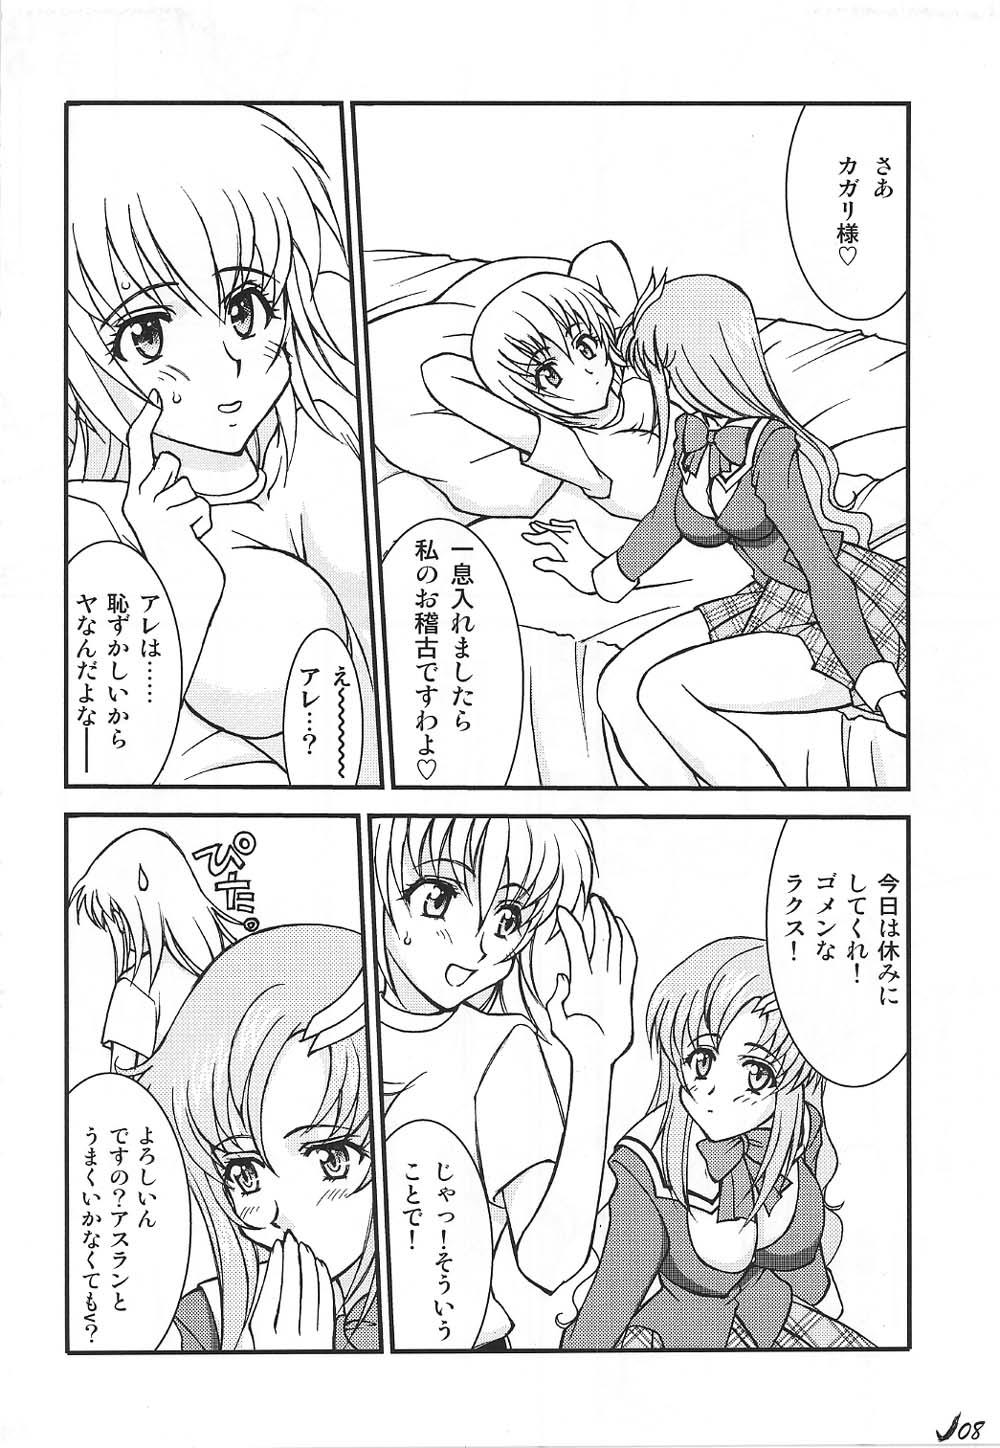 Striptease Conversation Clinic - Gundam seed Panty - Page 8